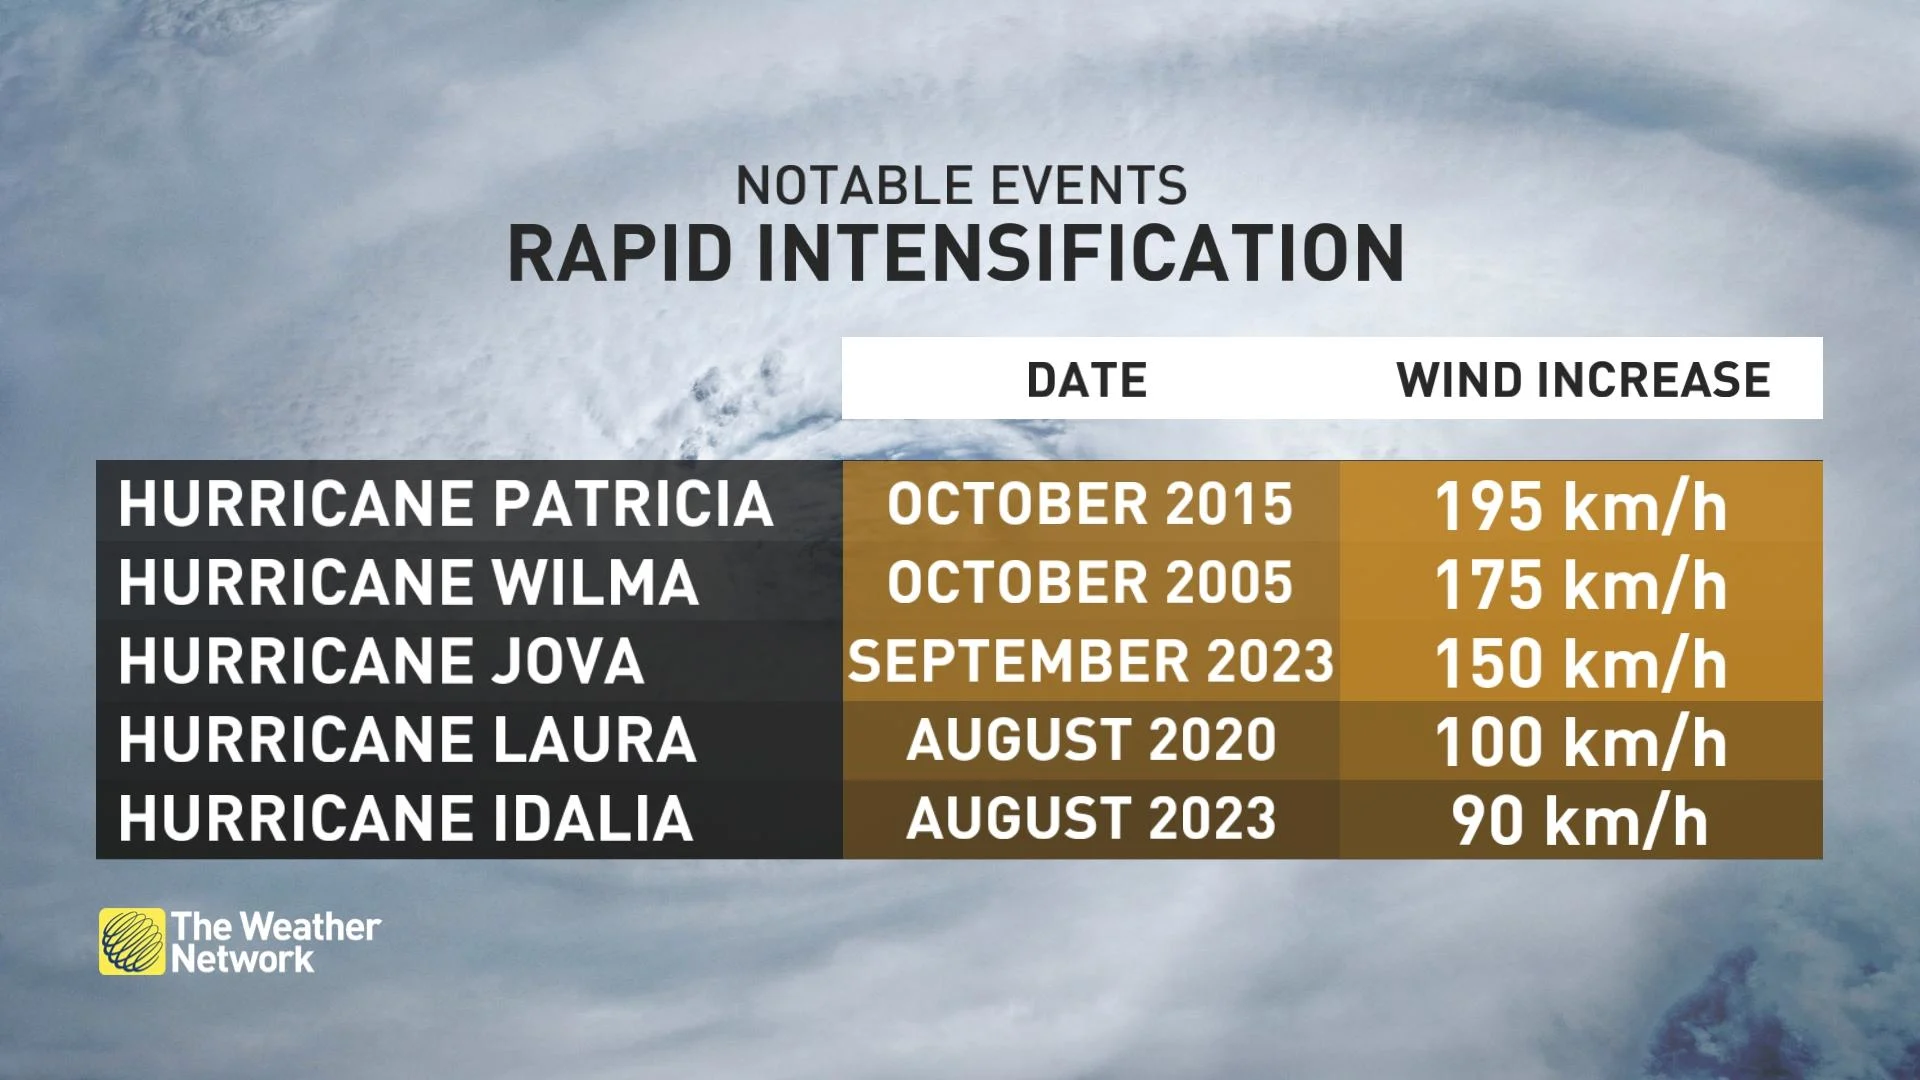 Notable Hurricane Rapid Intensification Events